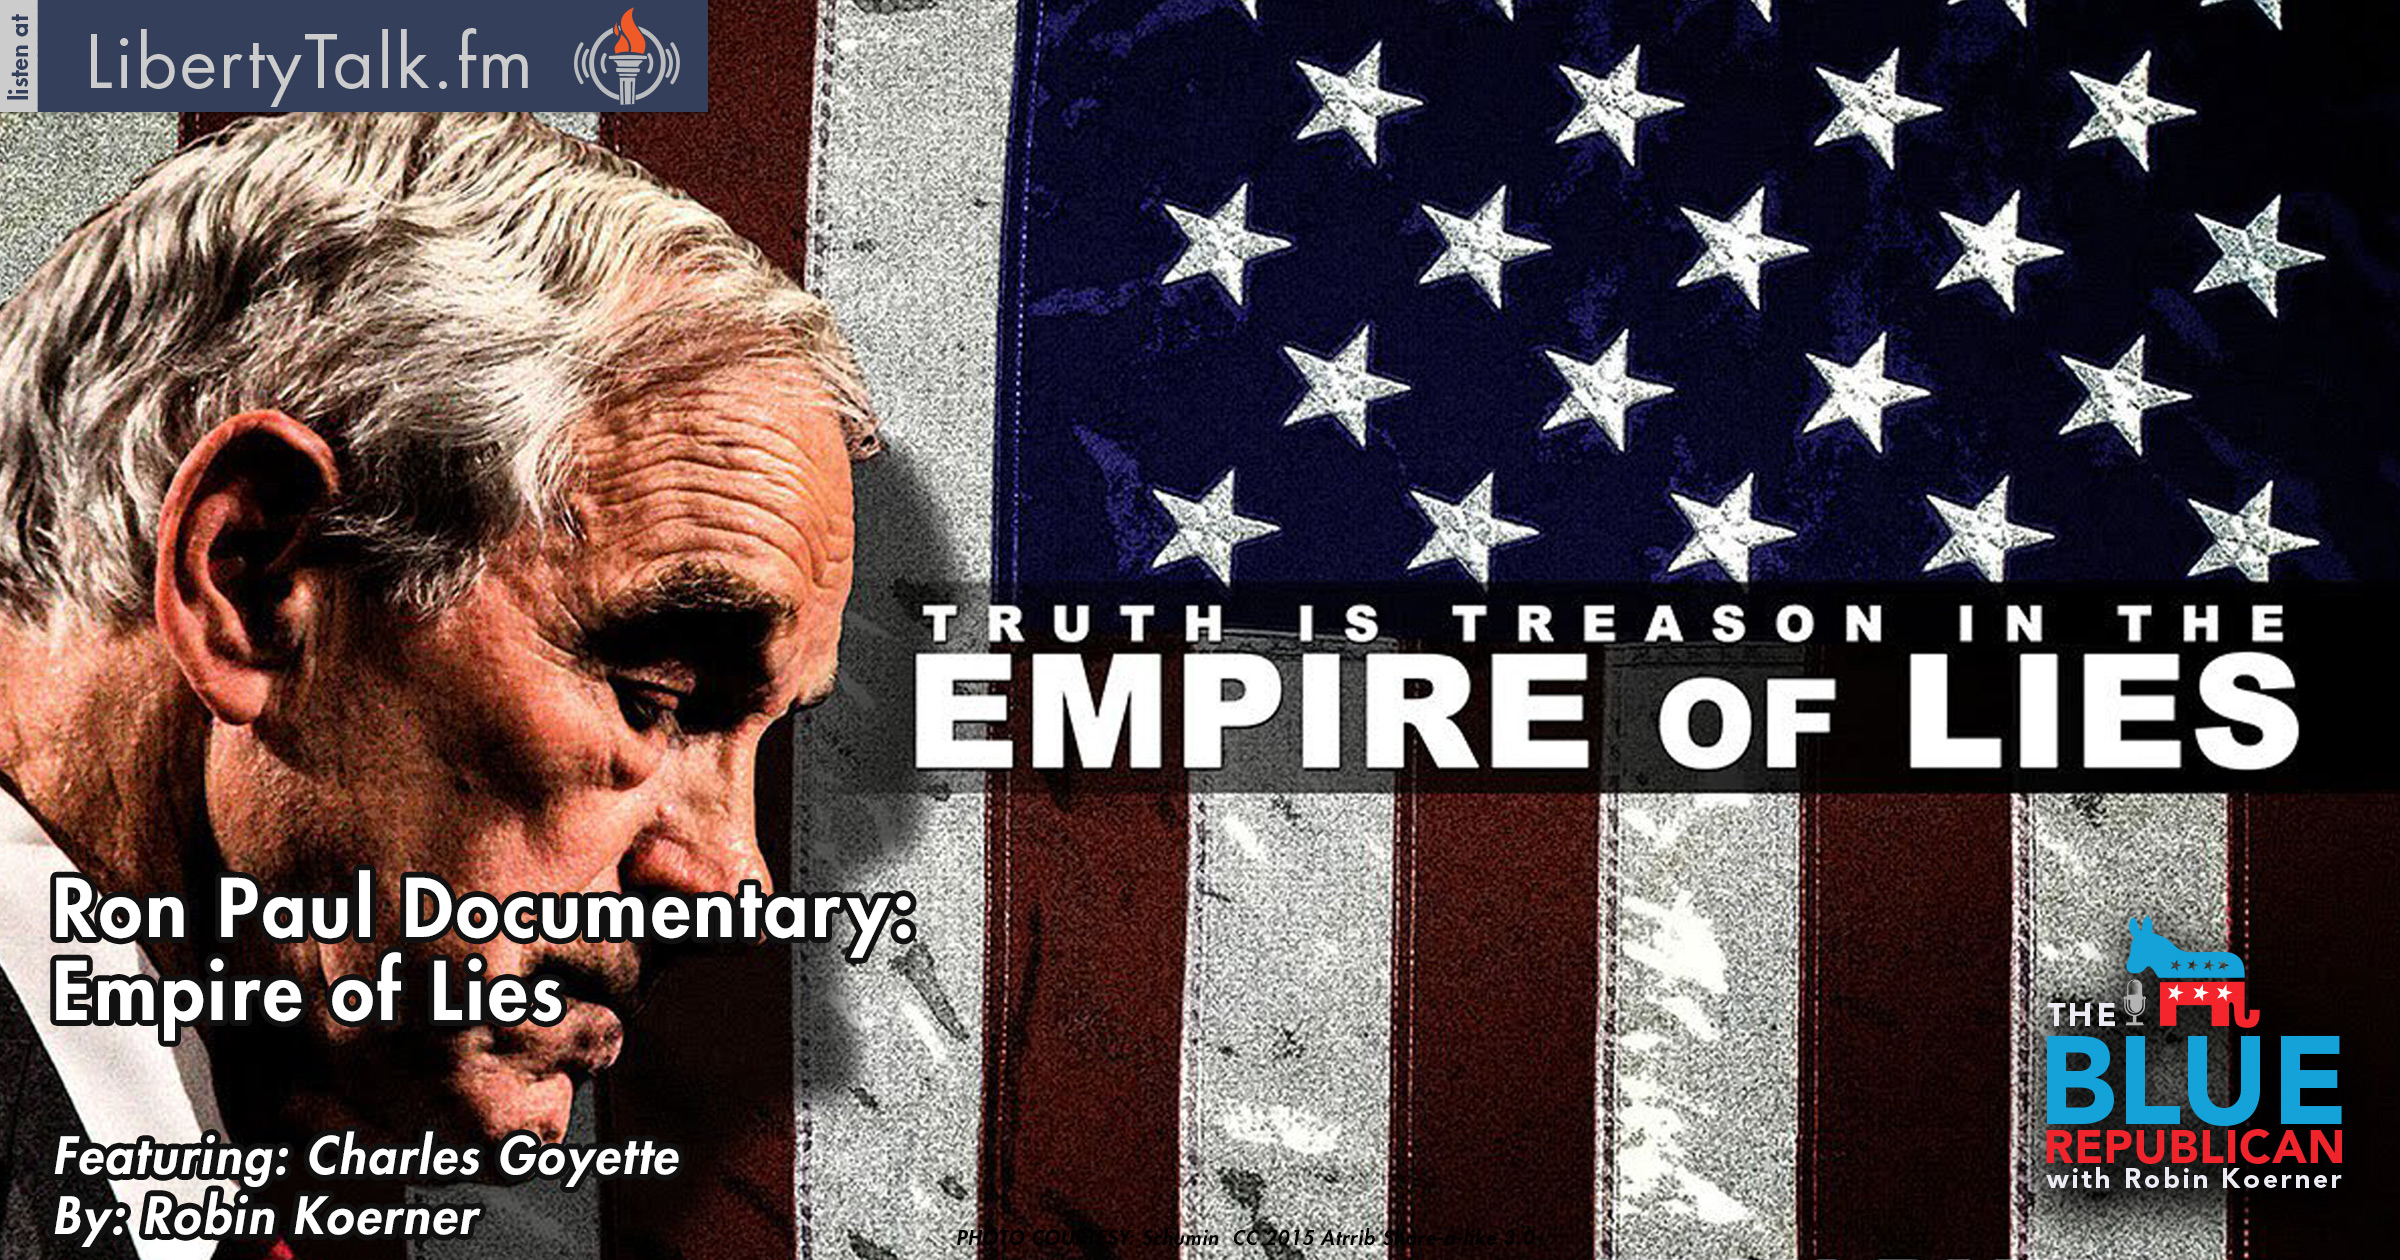 Ron Paul Documentary Empire of Lies Featured